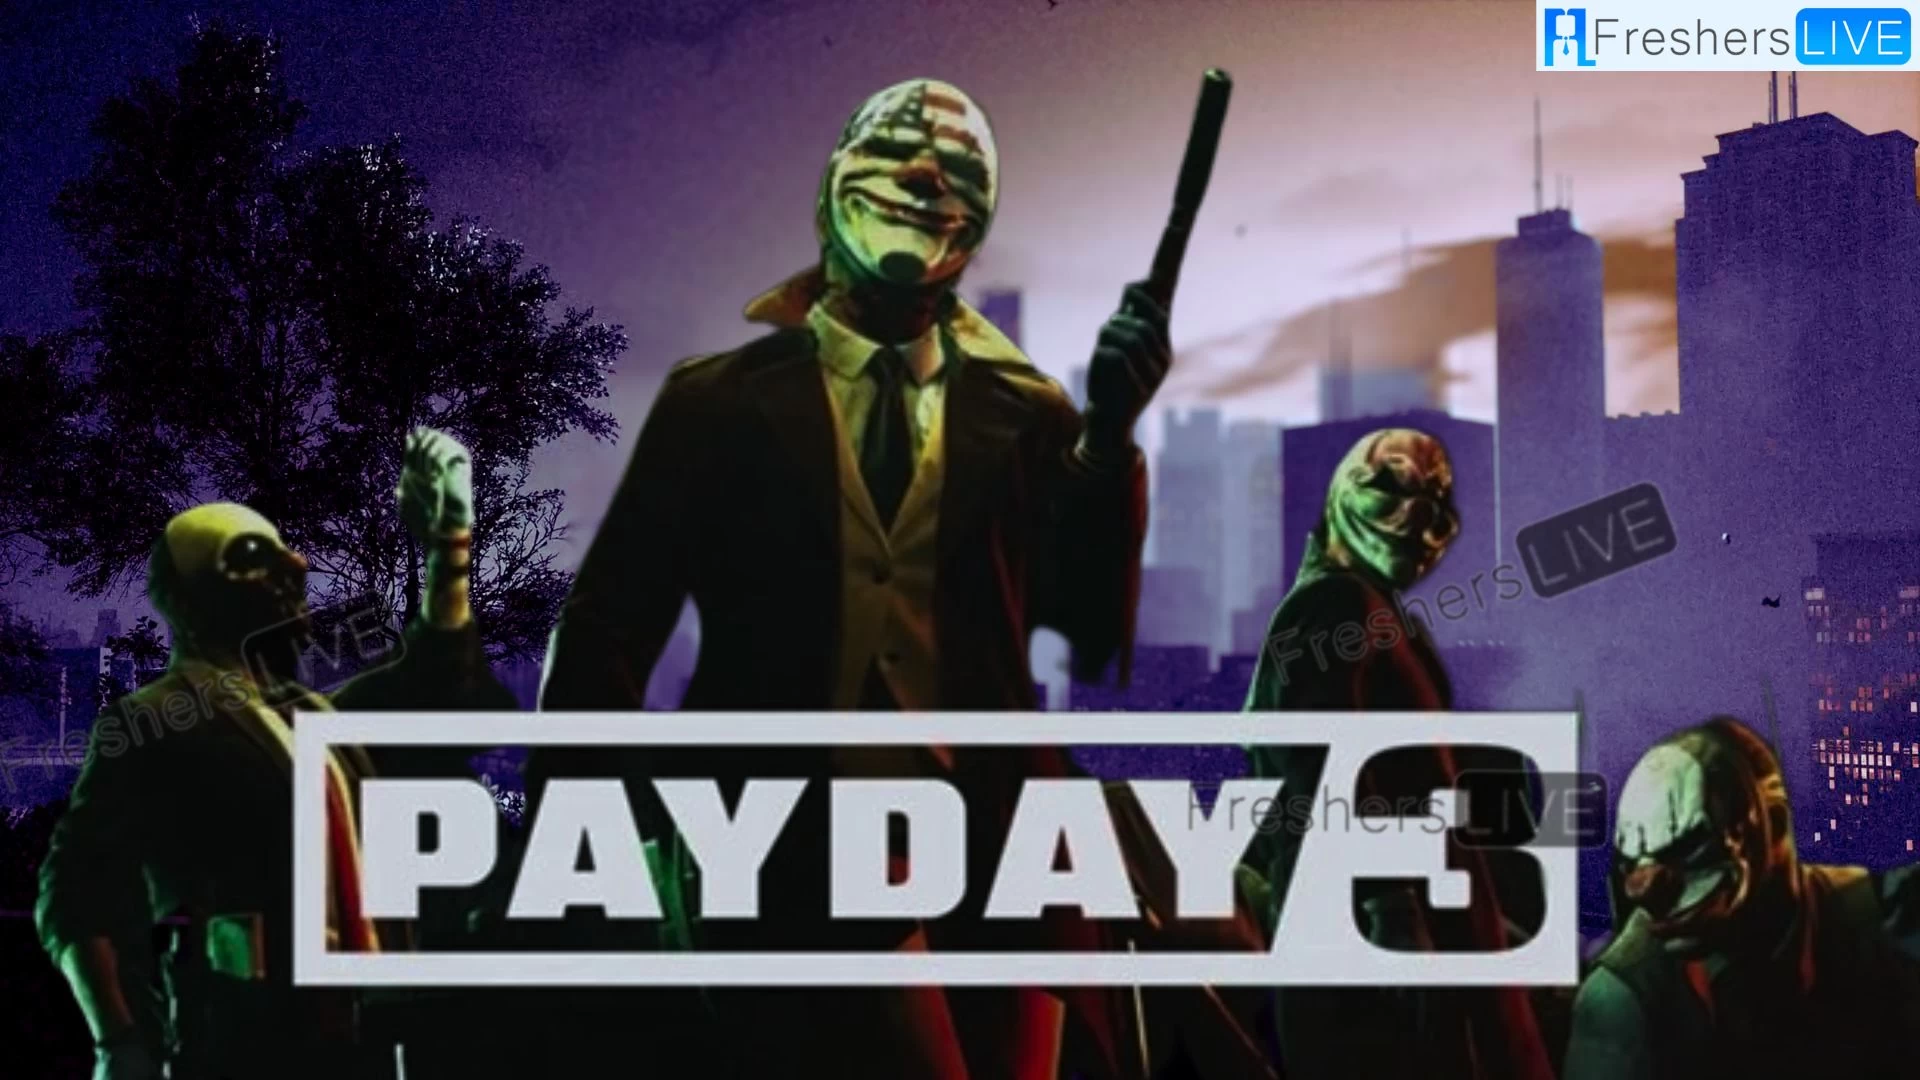 How to Fix Login Errors in Payday 3? Payday 3 Players are Not Happy About Login Requirement